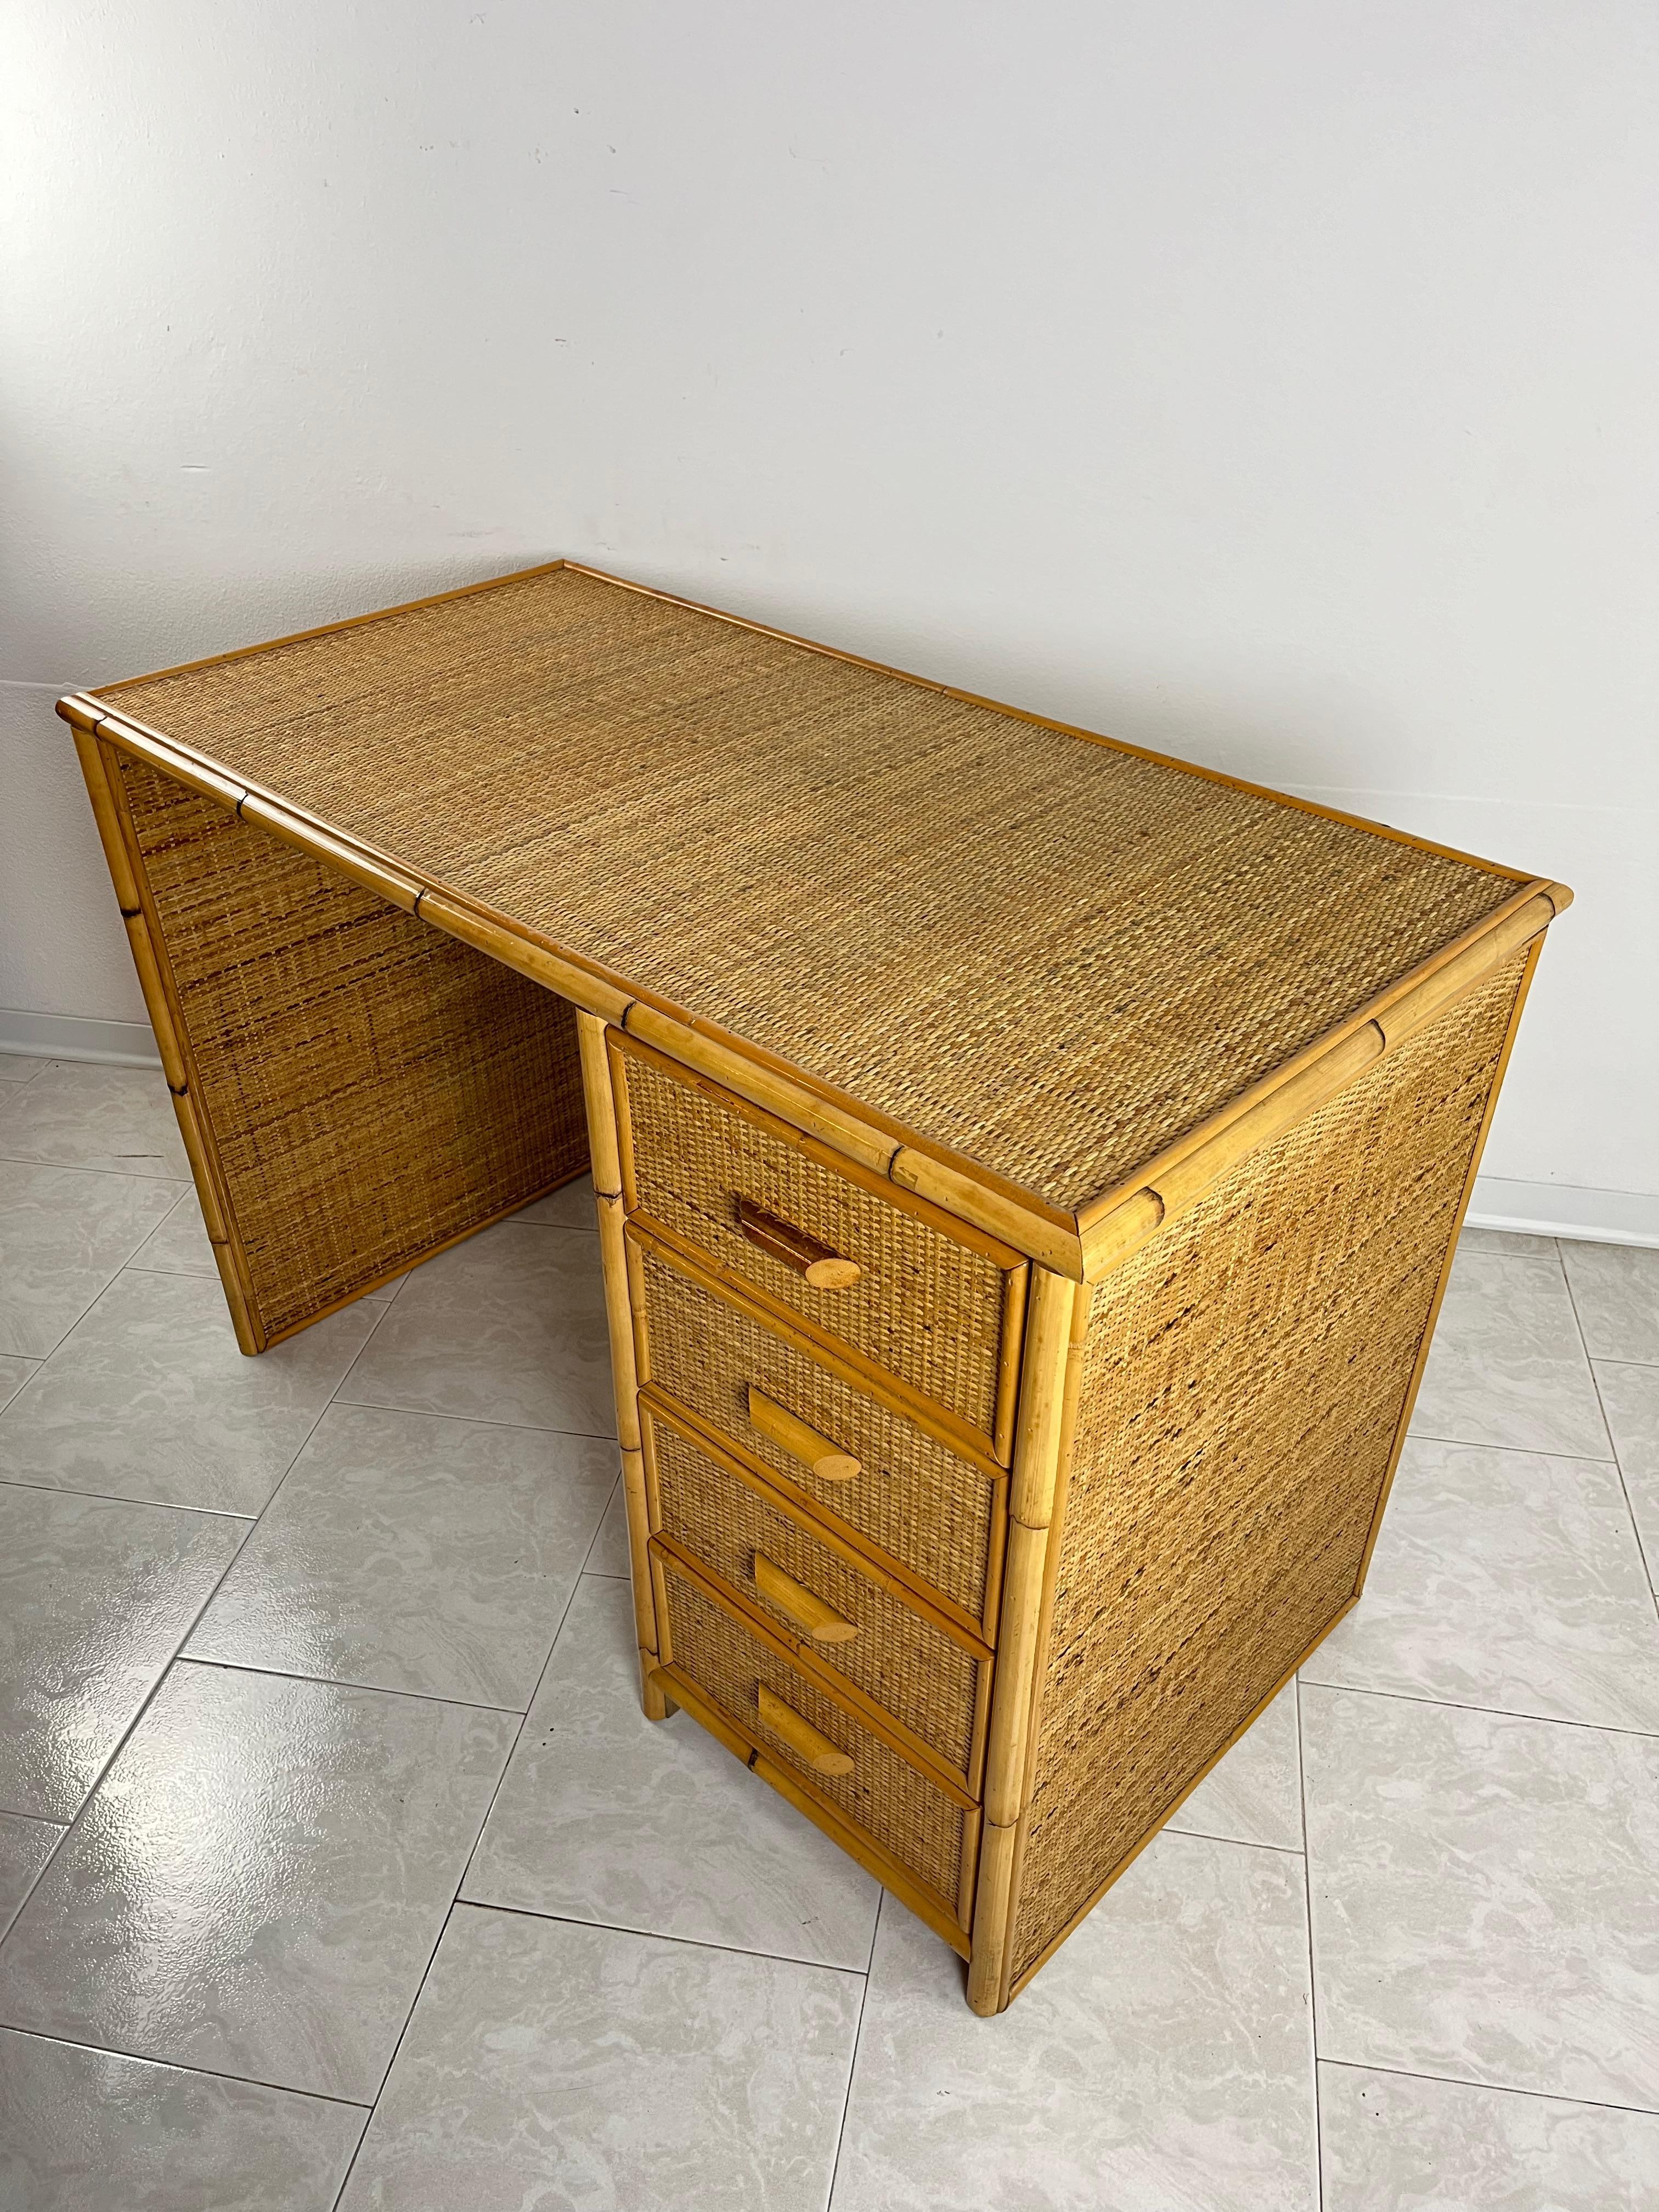 Mid-20th Century Mid-Century Rattan Wicker And Bamboo Desk Attributed To Dal Vera 1960s For Sale